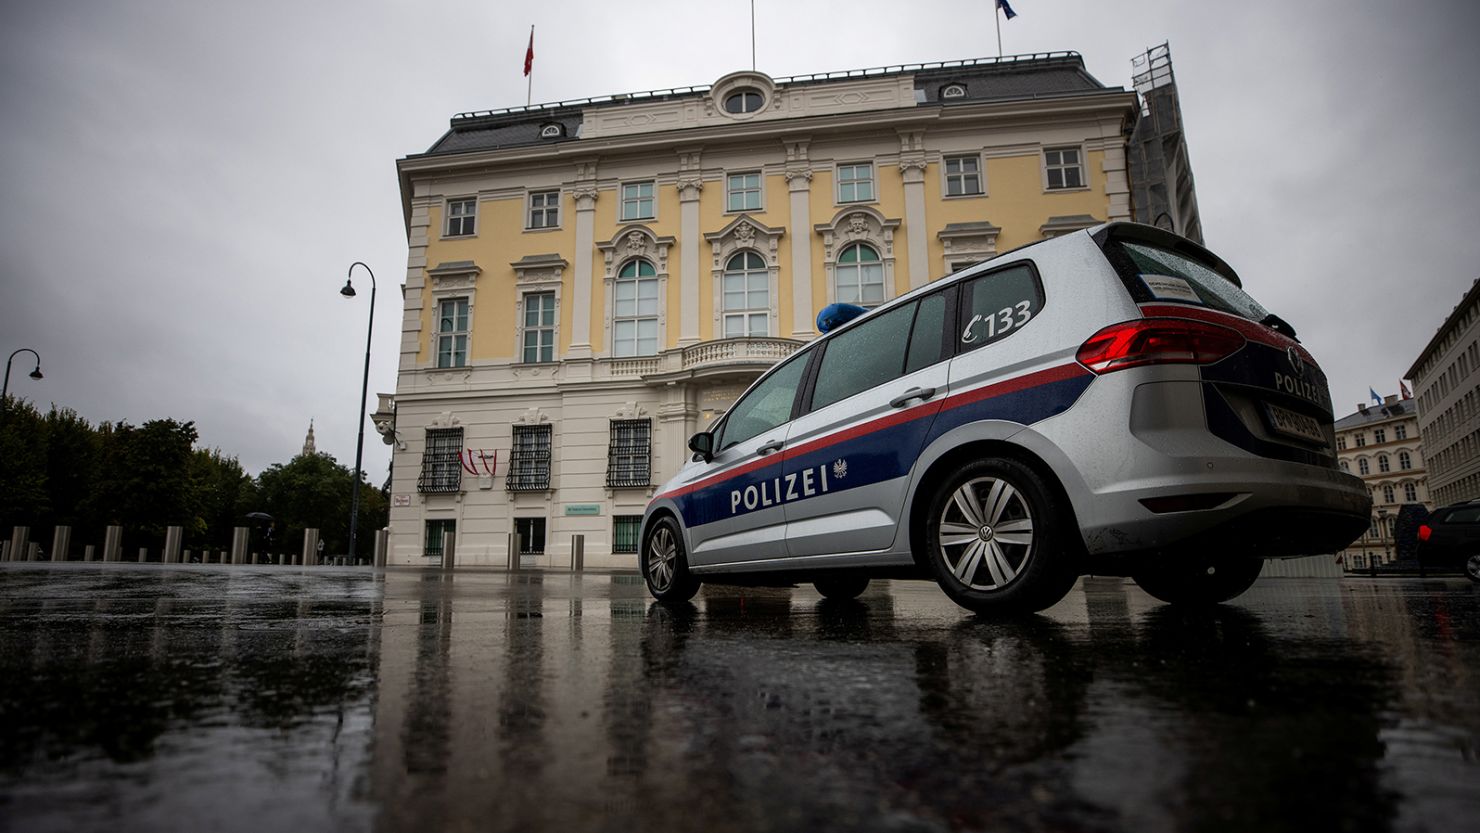 A police car parks in front of the Austrian federal chancellery in Vienna, Austria October 7, 2021.